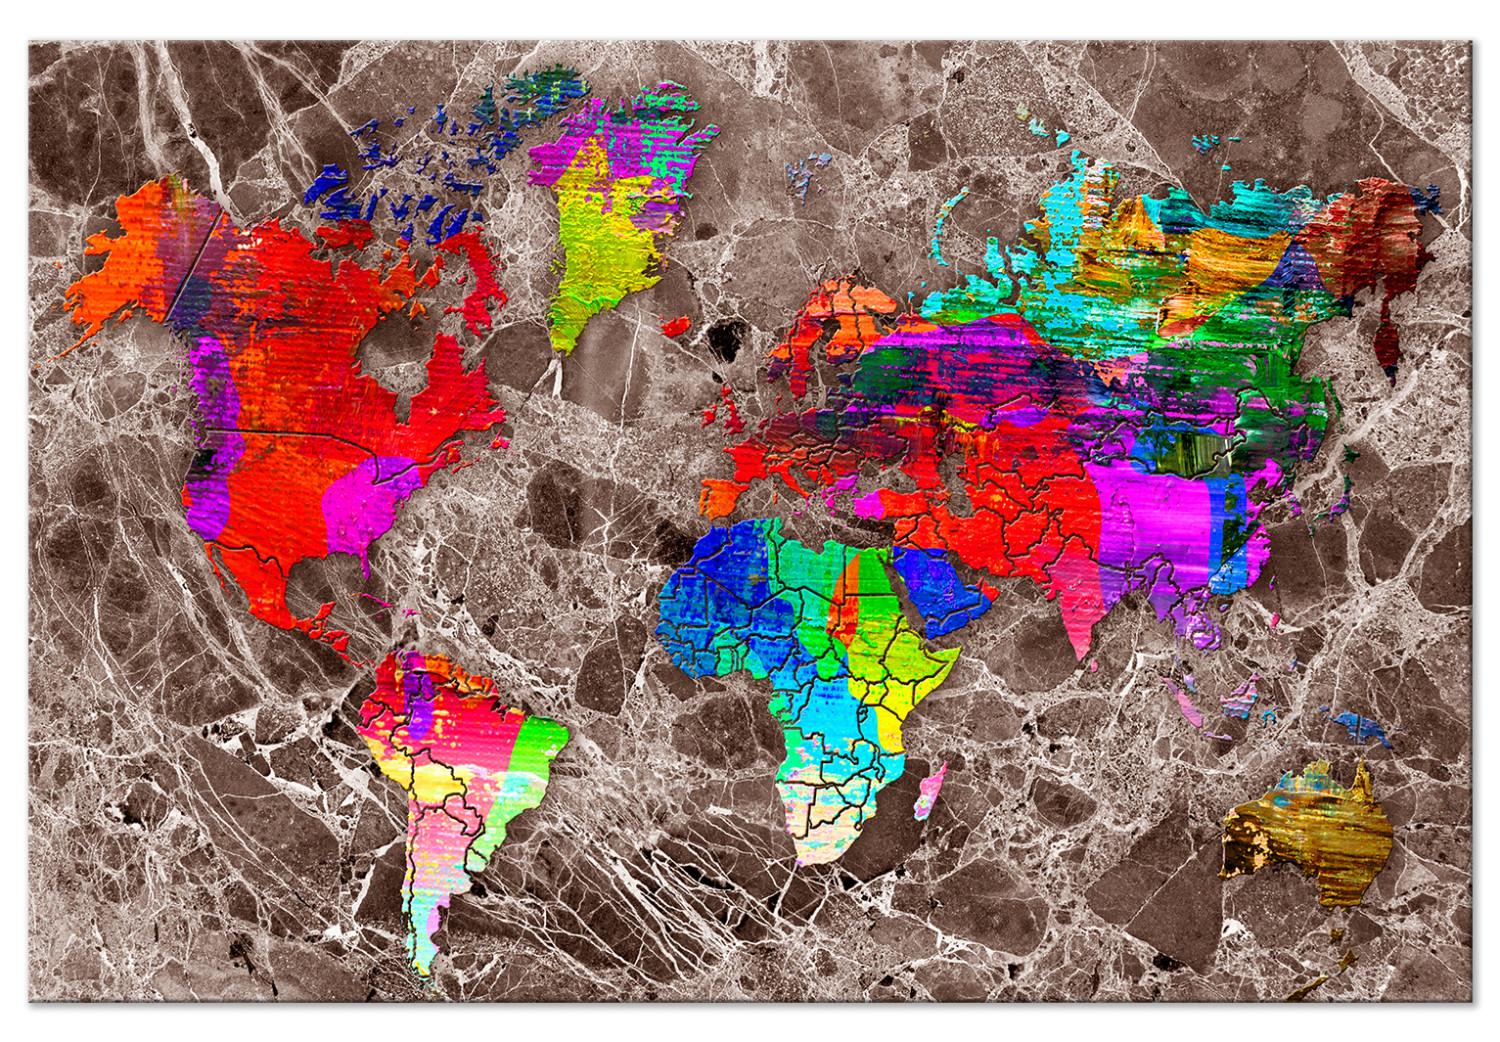 Canvas Colorful World (1-piece) - multicolored abstract world map